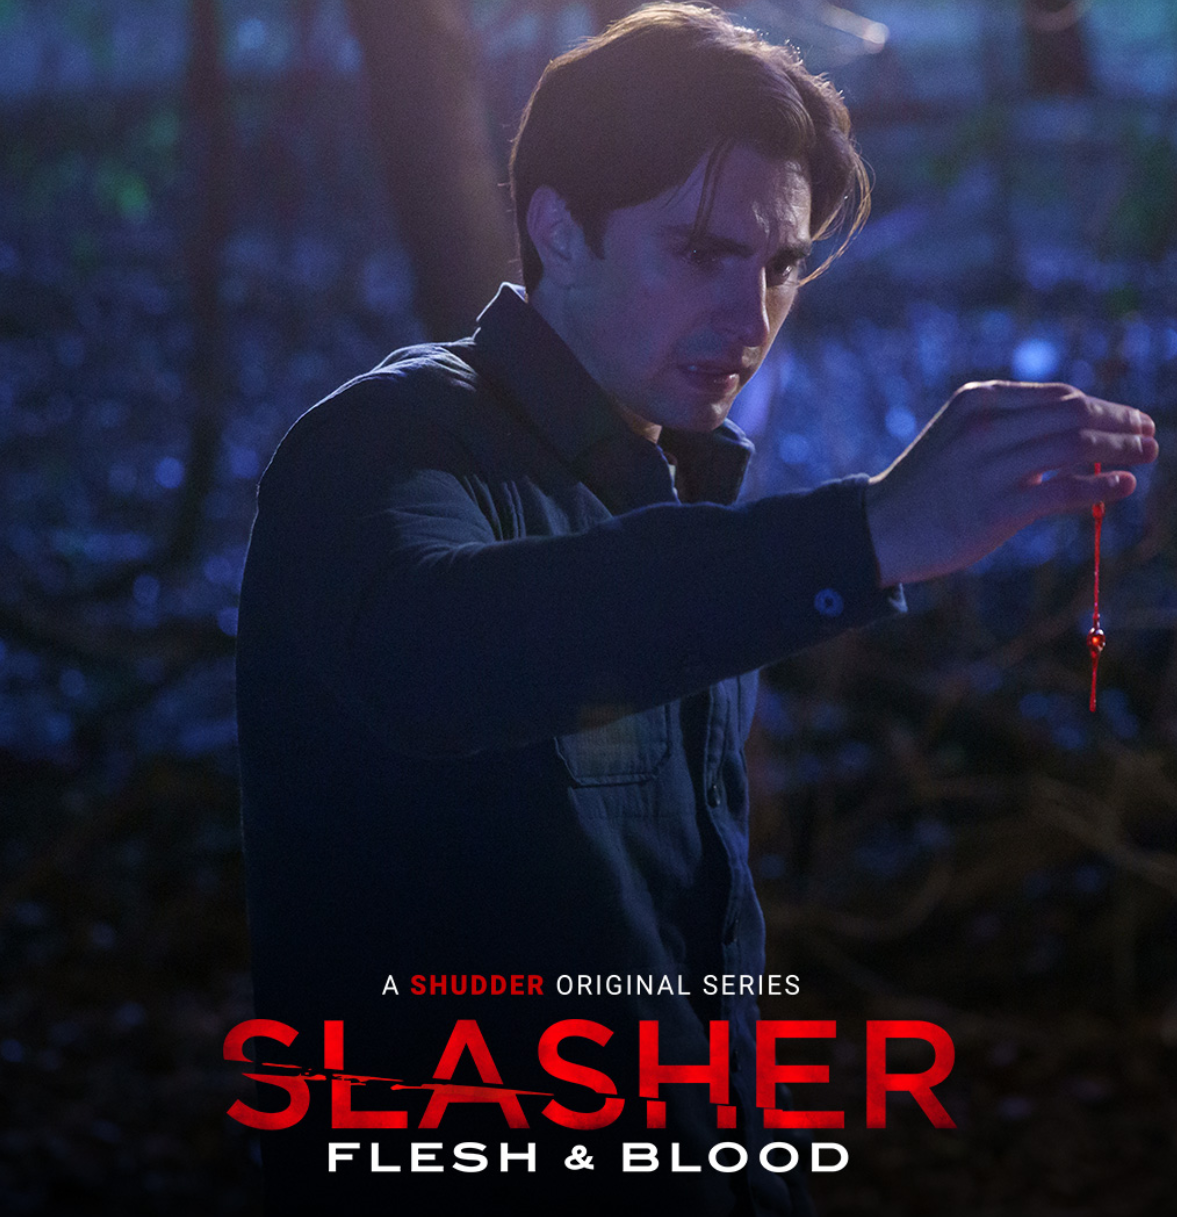 A man with neatly cut short hair stands in the woods with his hand dripping blood and guts. Slasher S4E6